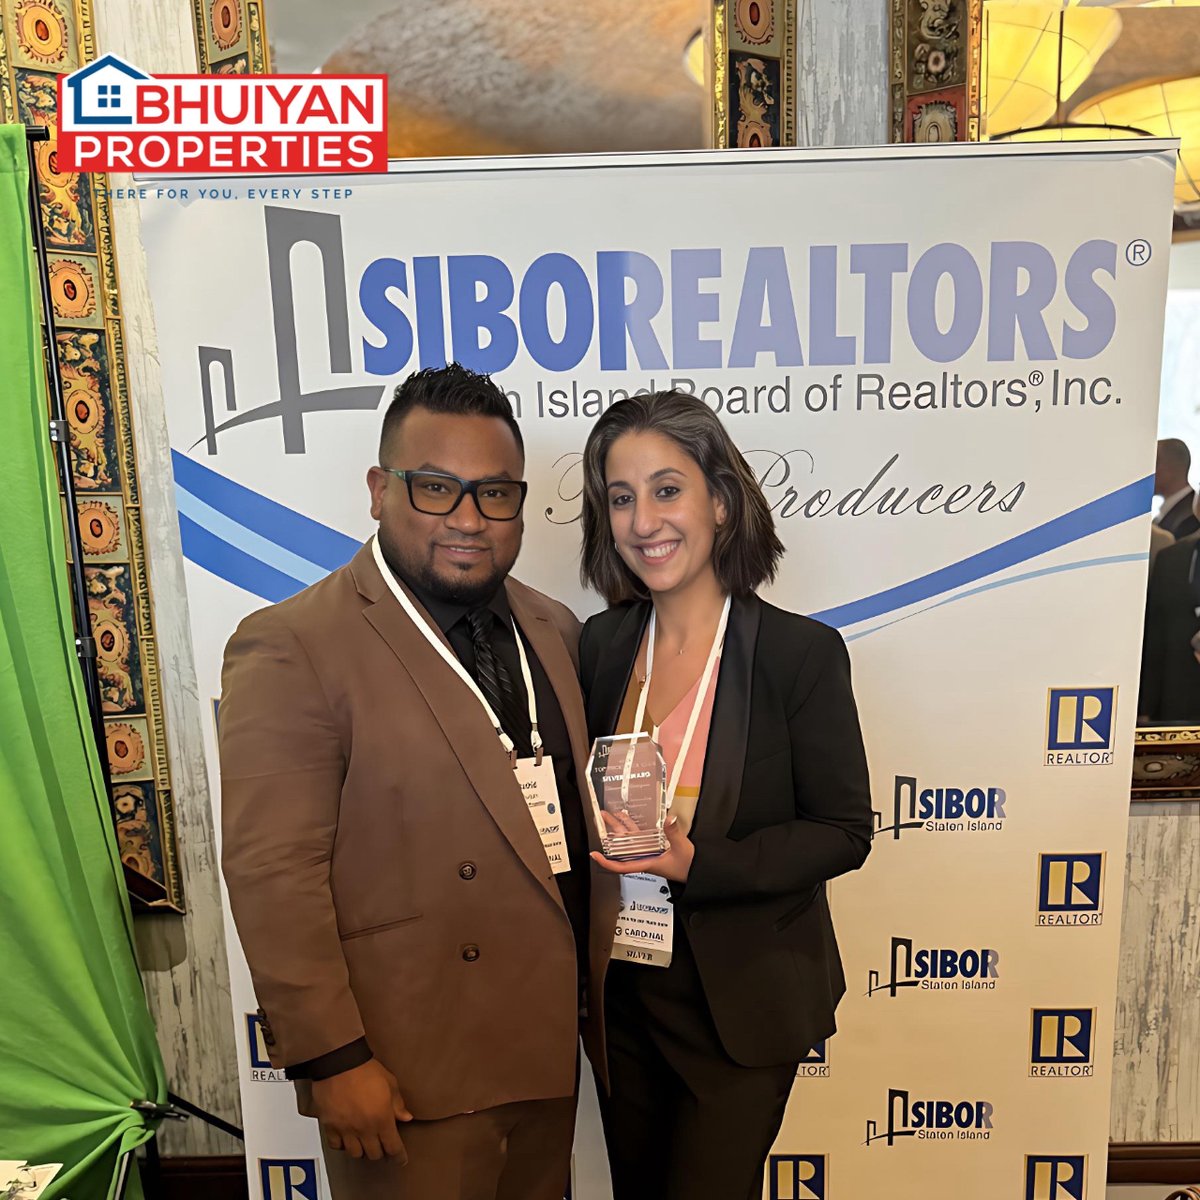 Congratulations to Oksana Bhuiyan for achieving the Top Producer Silver Award with SIBOR in Staten Island! 🎉🥈 Your dedication and hard work truly shine through.

bhuiyan.link/oak
Keep reaching for the stars! 🌟 #TopProducer #RealEstate #SIBOR #StatenIsland